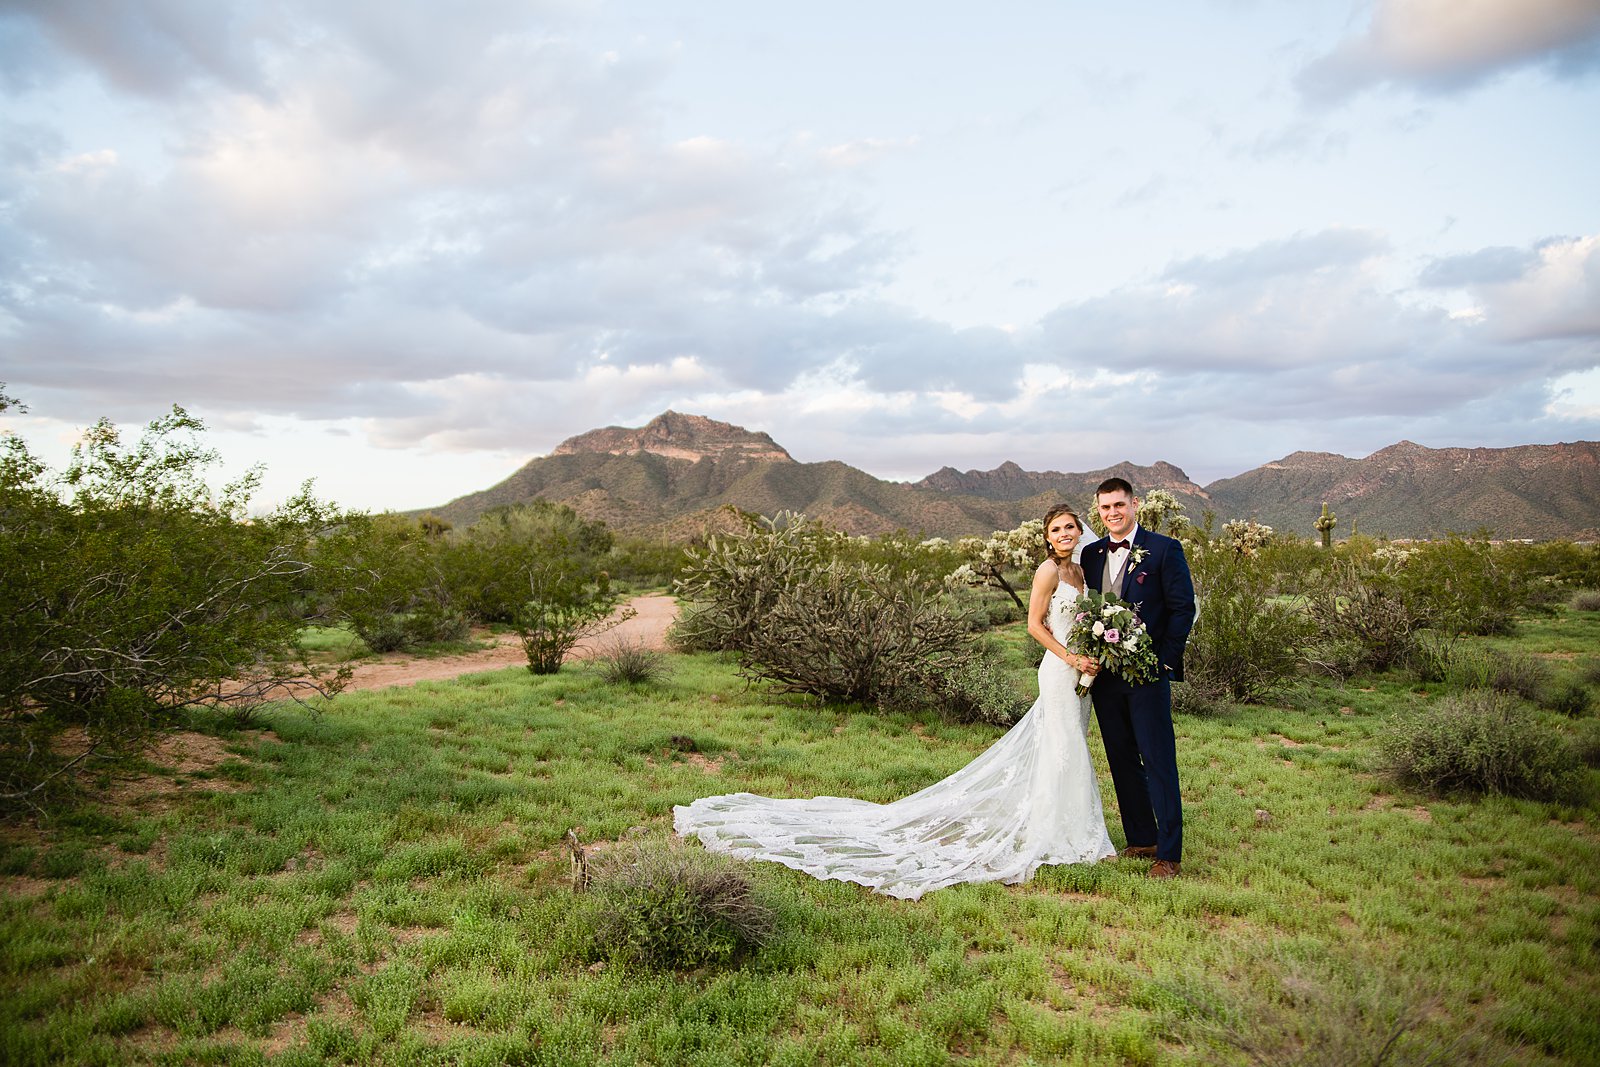 Bride and groom in the desert at for their Spring wedding by Phoenix wedding photographer PMA Photography.